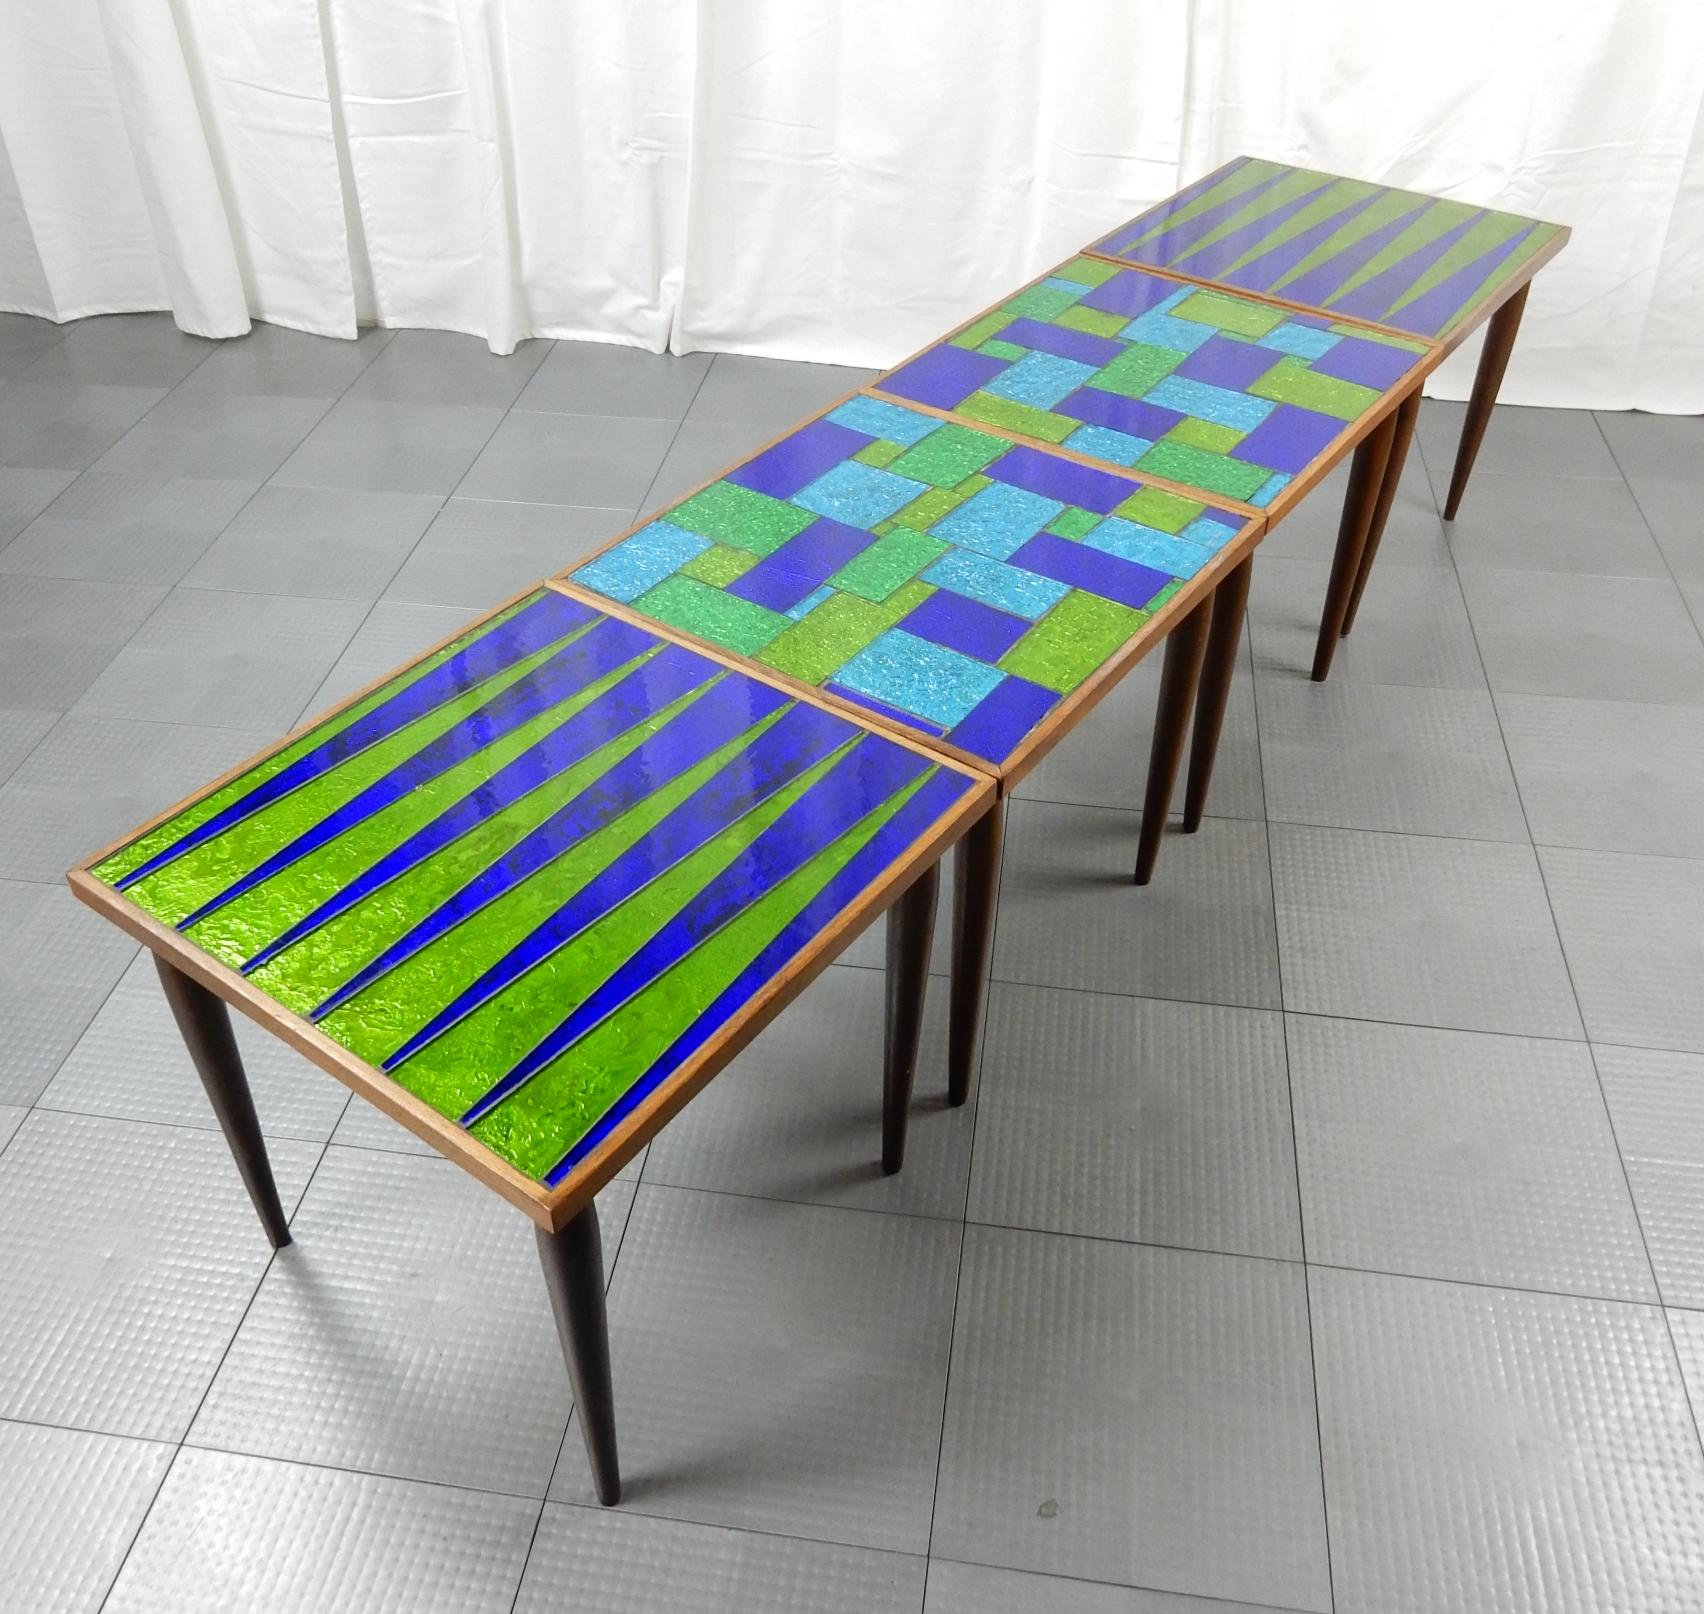 Gorgeous set of 4 mosaic blue/green glass inlay tables by Georges Briard.
Briard, known for his table top glassware, produced some rare furniture pieces such as these.
These have tapered walnut legs and framed edge with patchwork glass.
Can be